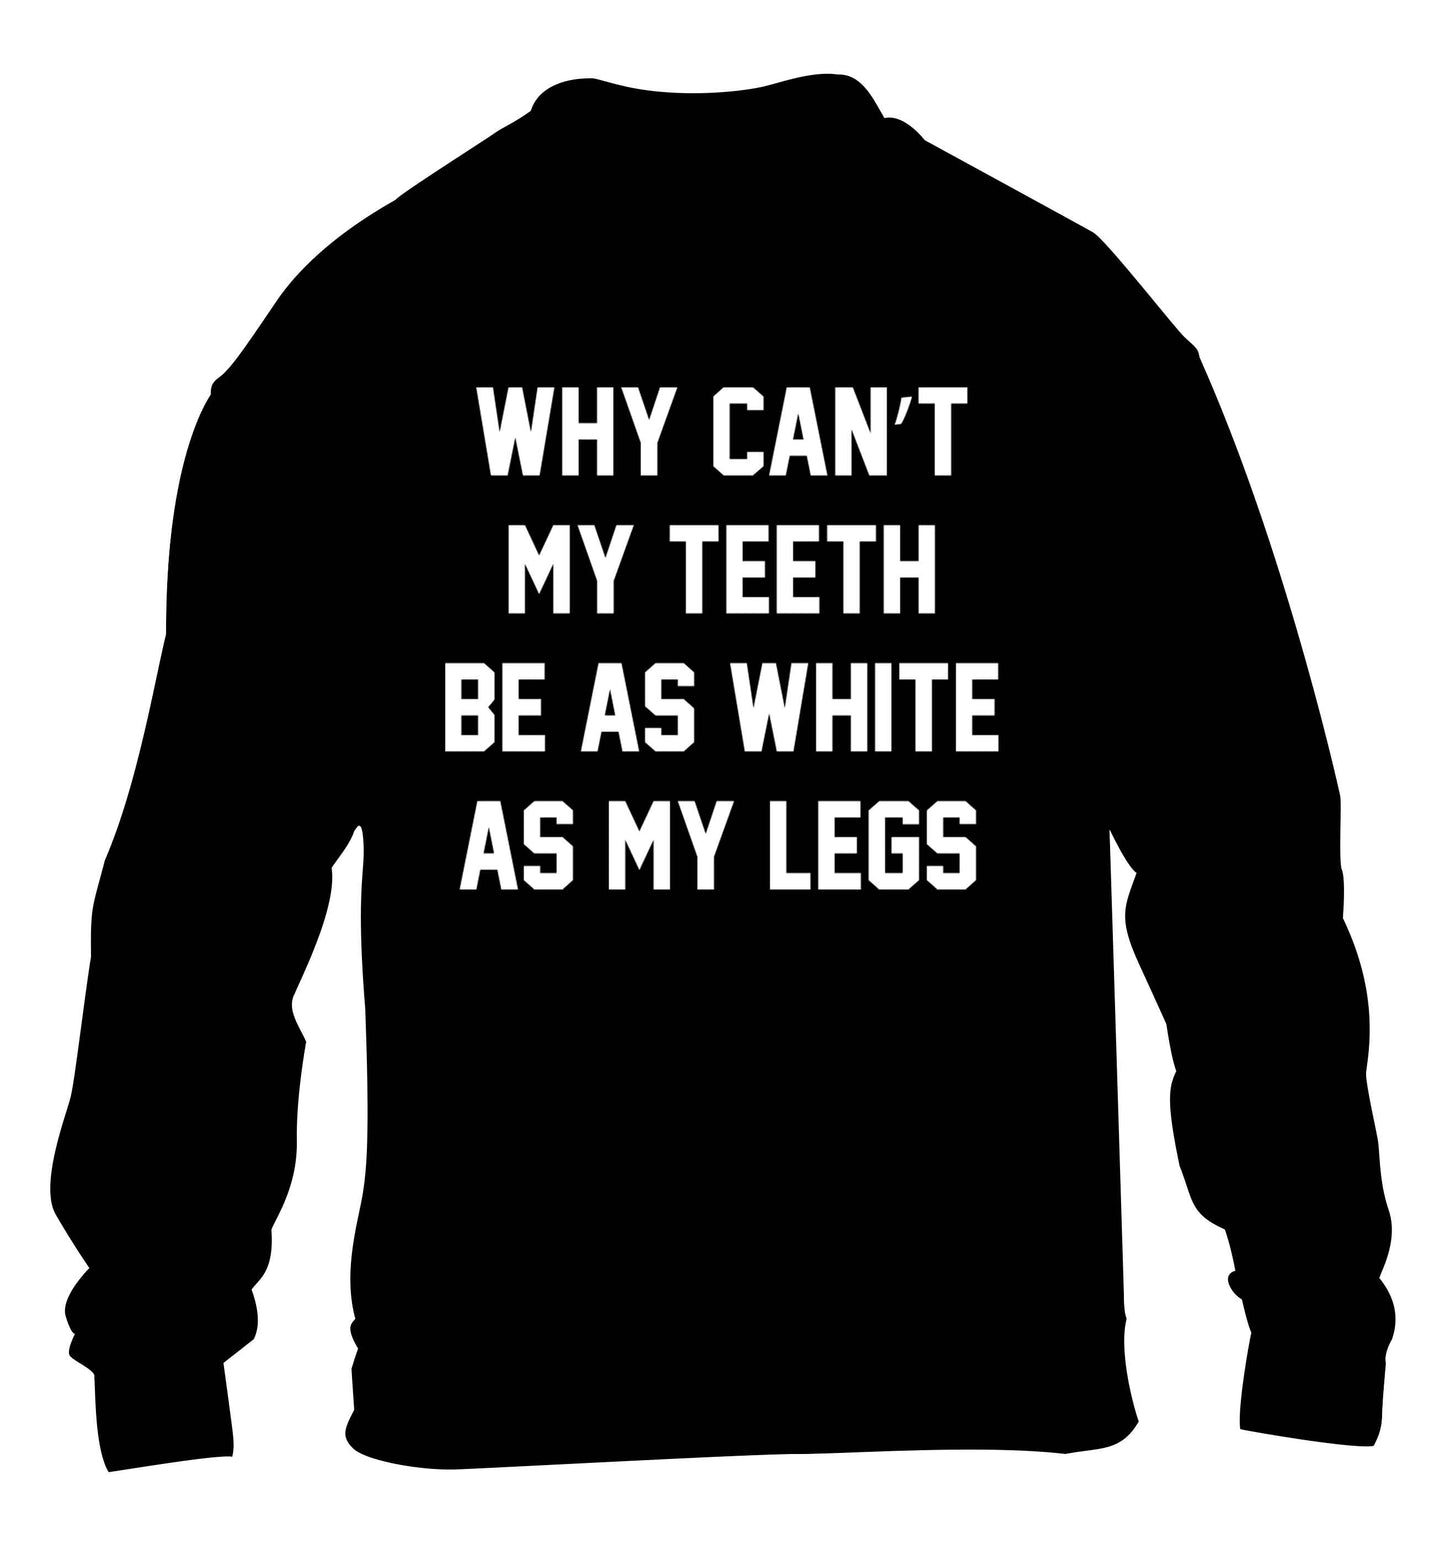 Why can't my teeth be as white as my legs children's black sweater 12-13 Years